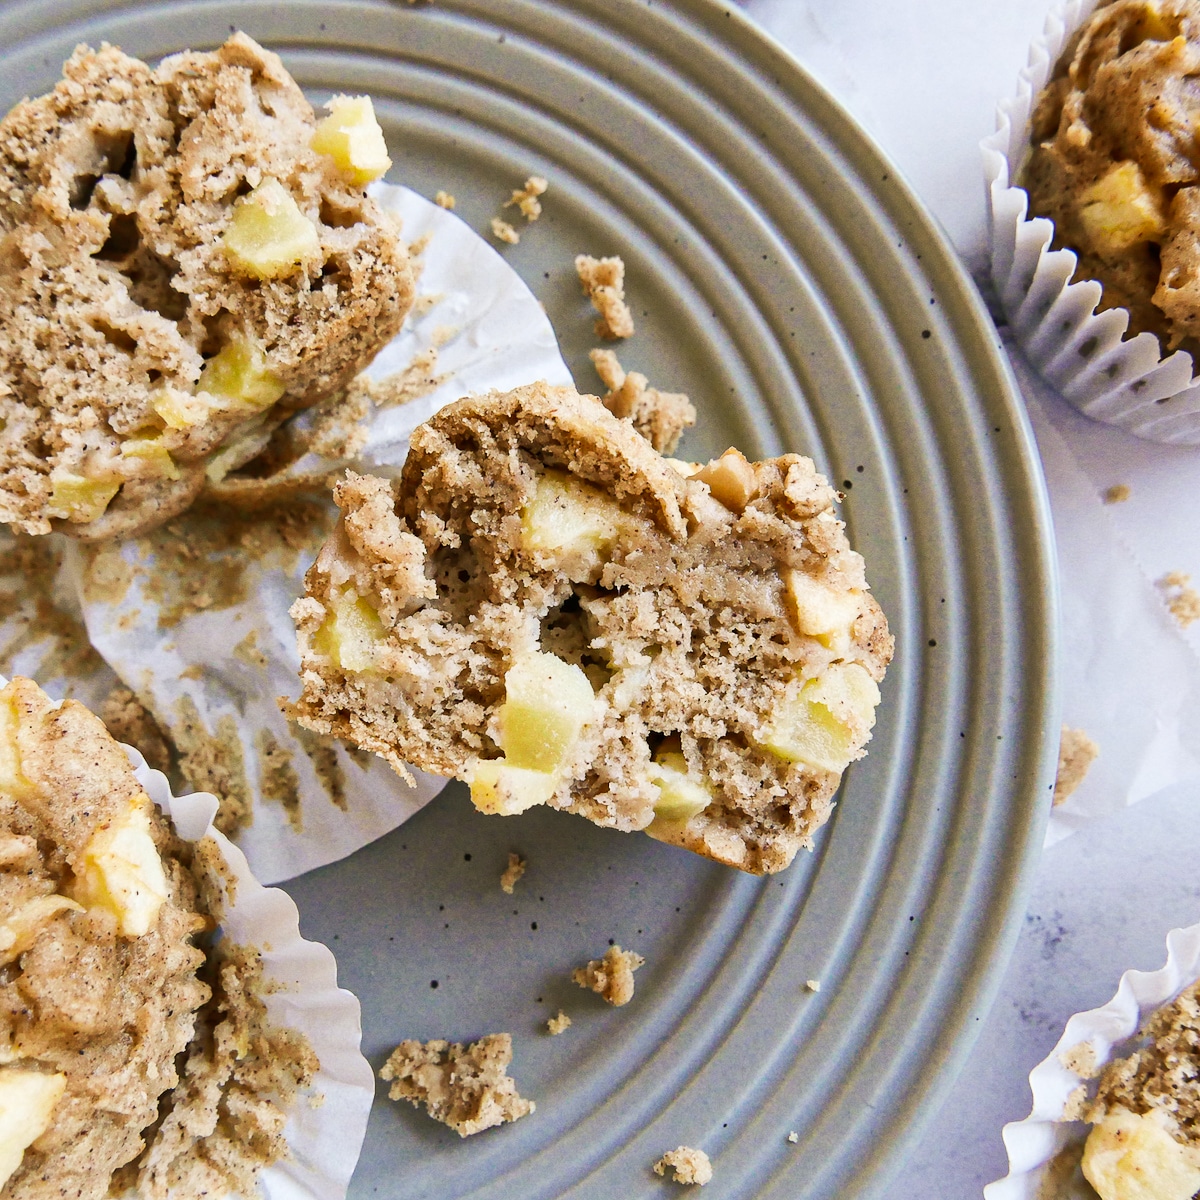 Sliced apple muffins on a gray plate with crumbs.